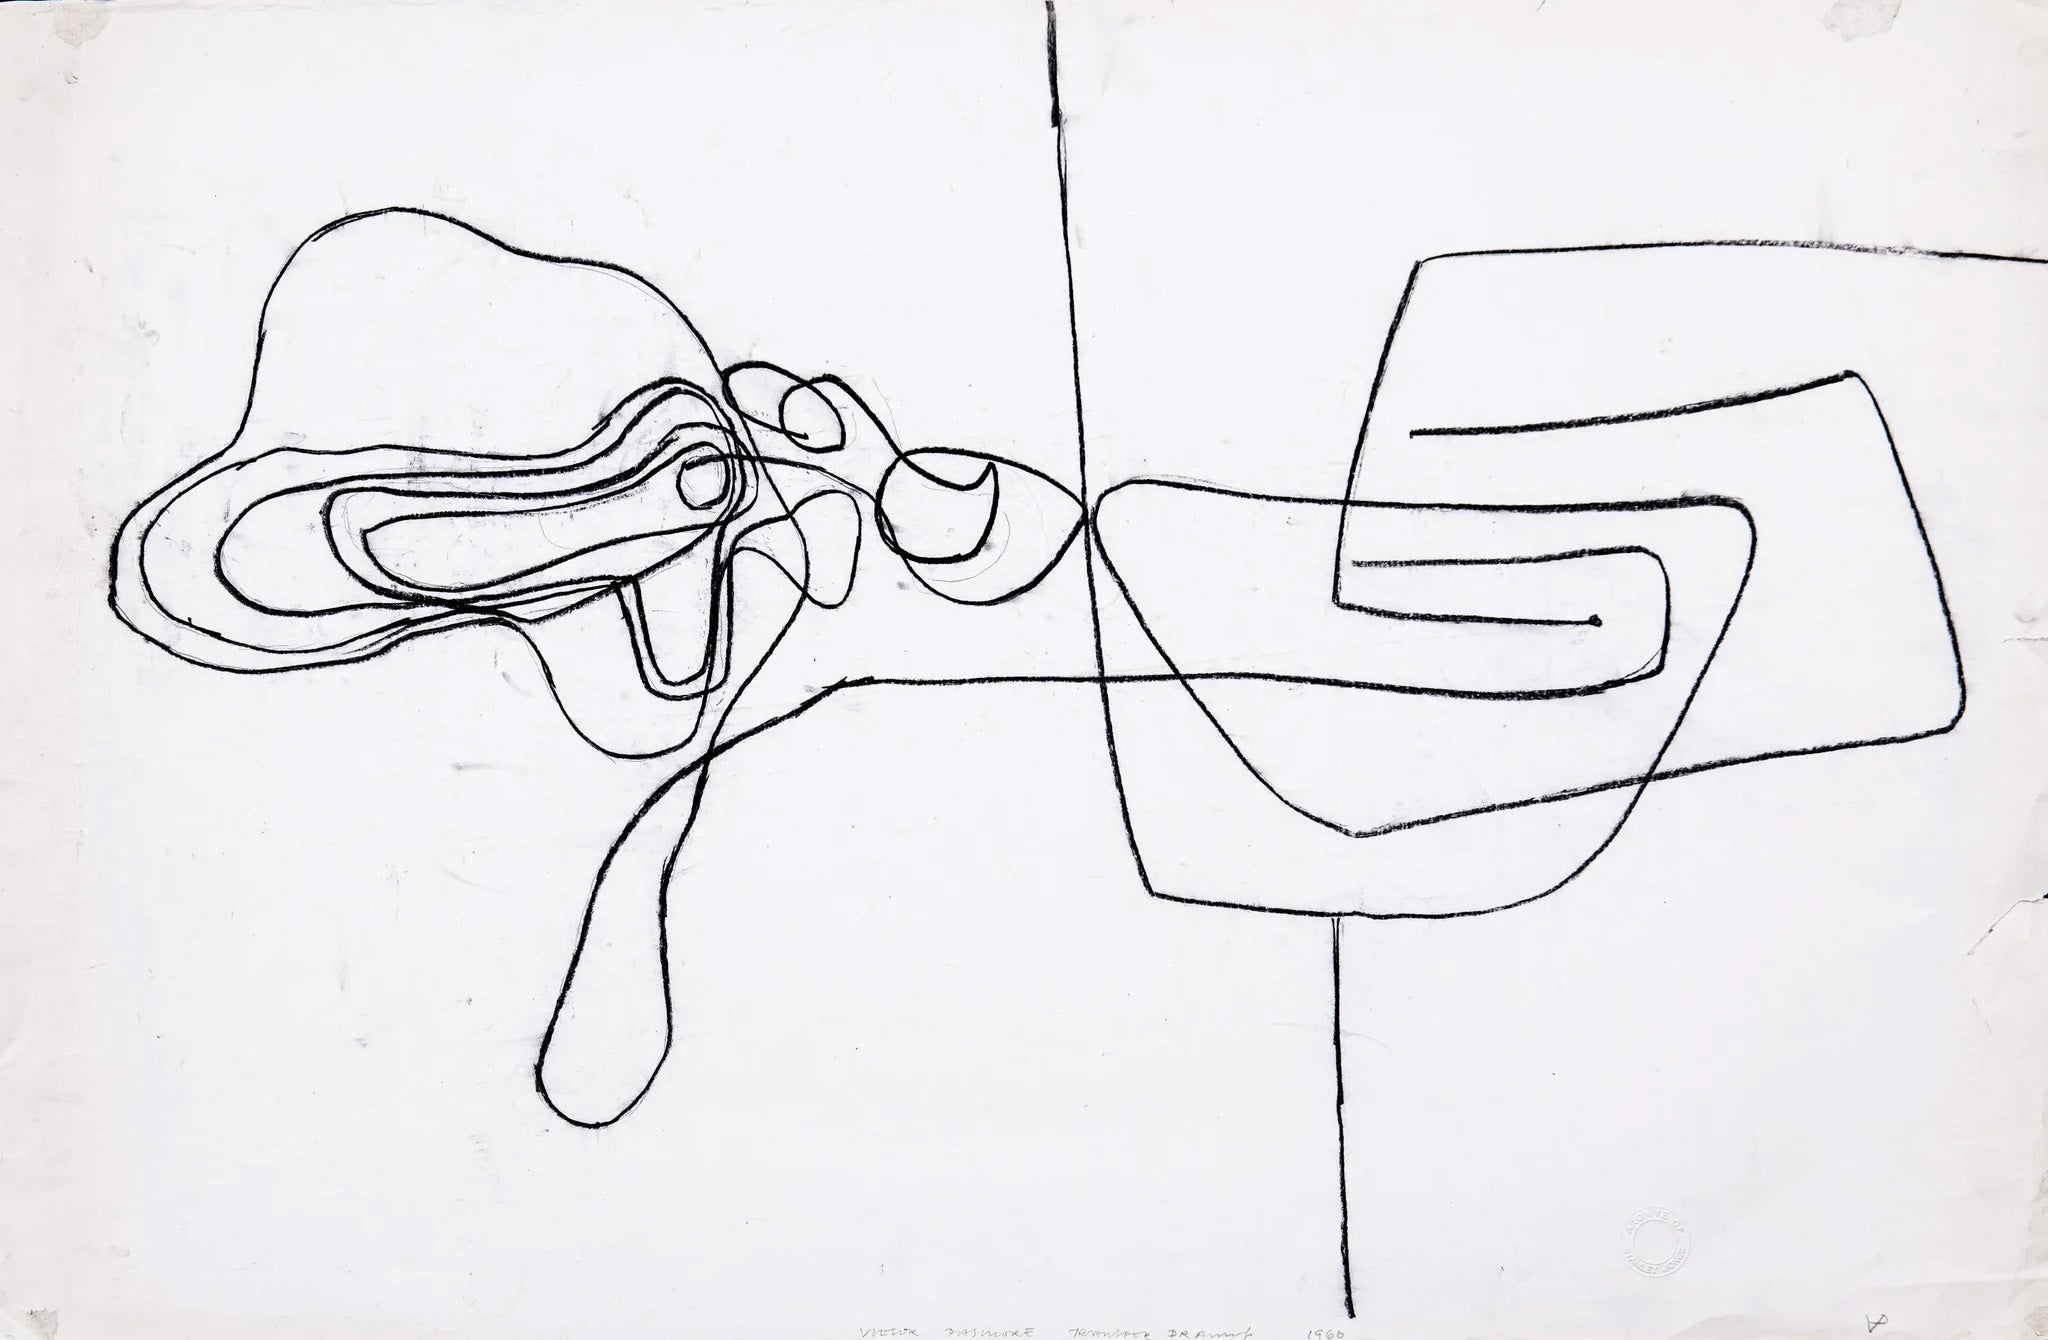 Victor Pasmore, Points of Contact No 3, 1965, charcoal